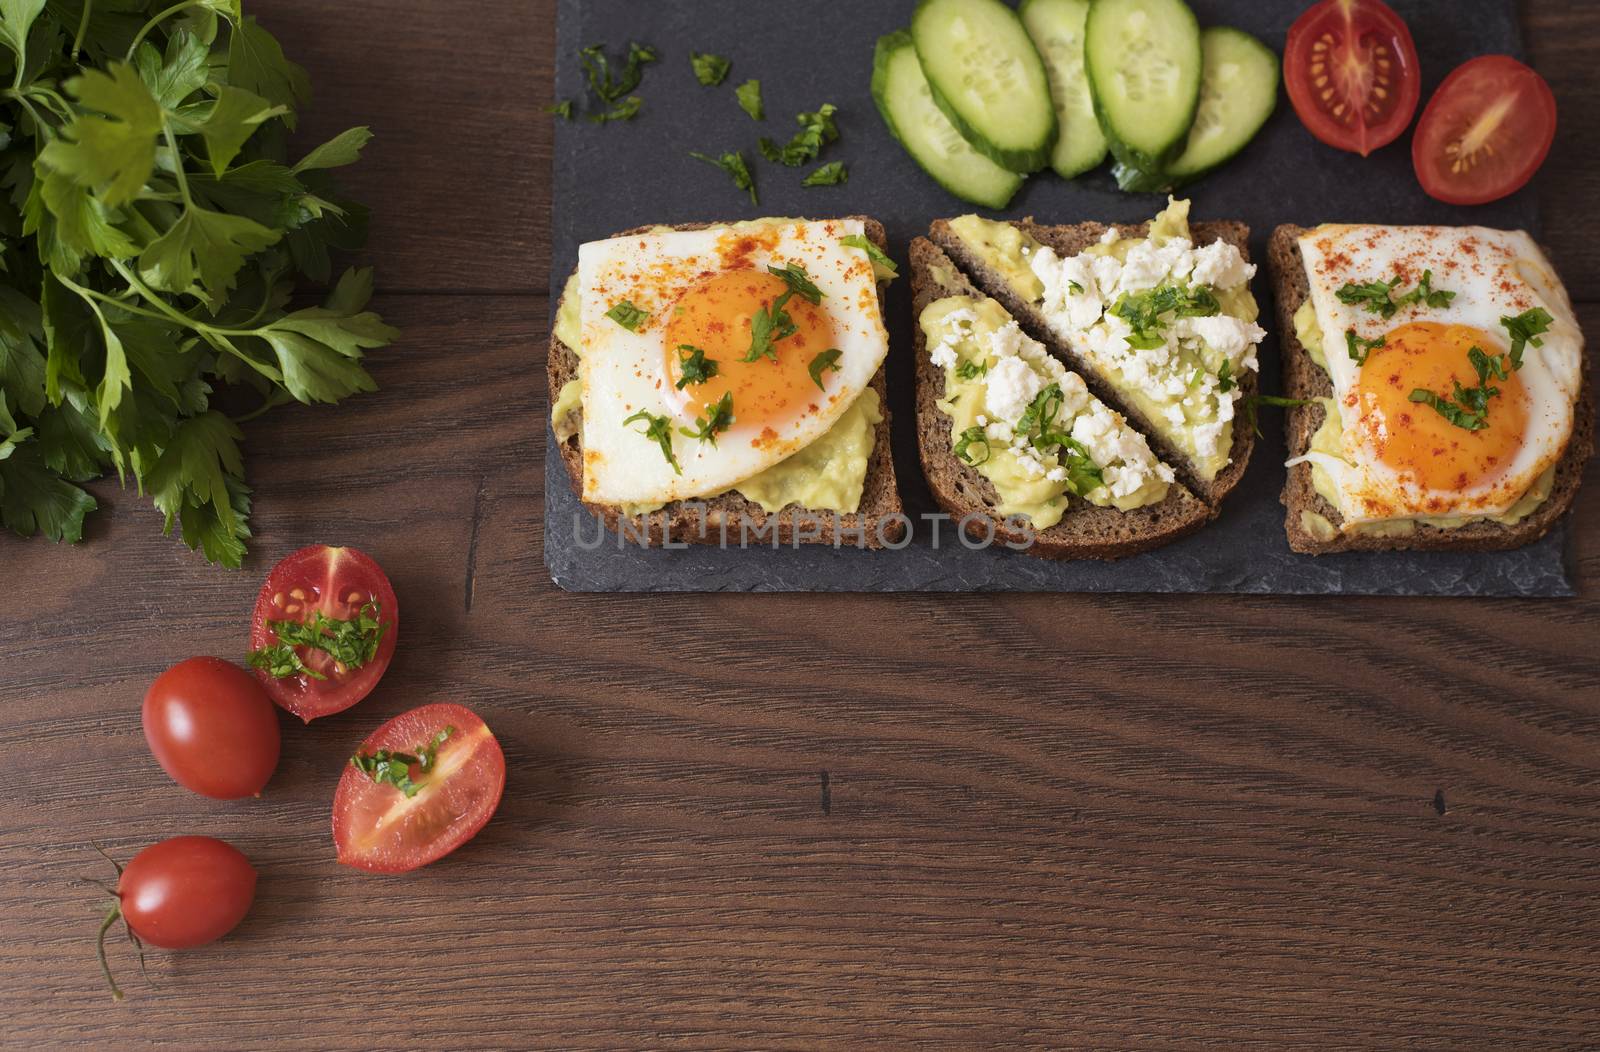 Avocado Toast. Healthy Breakfast. Top View. Homemade Sandwich With Avocado And Fried Eggs, Cherry Tomato And Cucumbers On A Wooden Background. Dark Food Photography